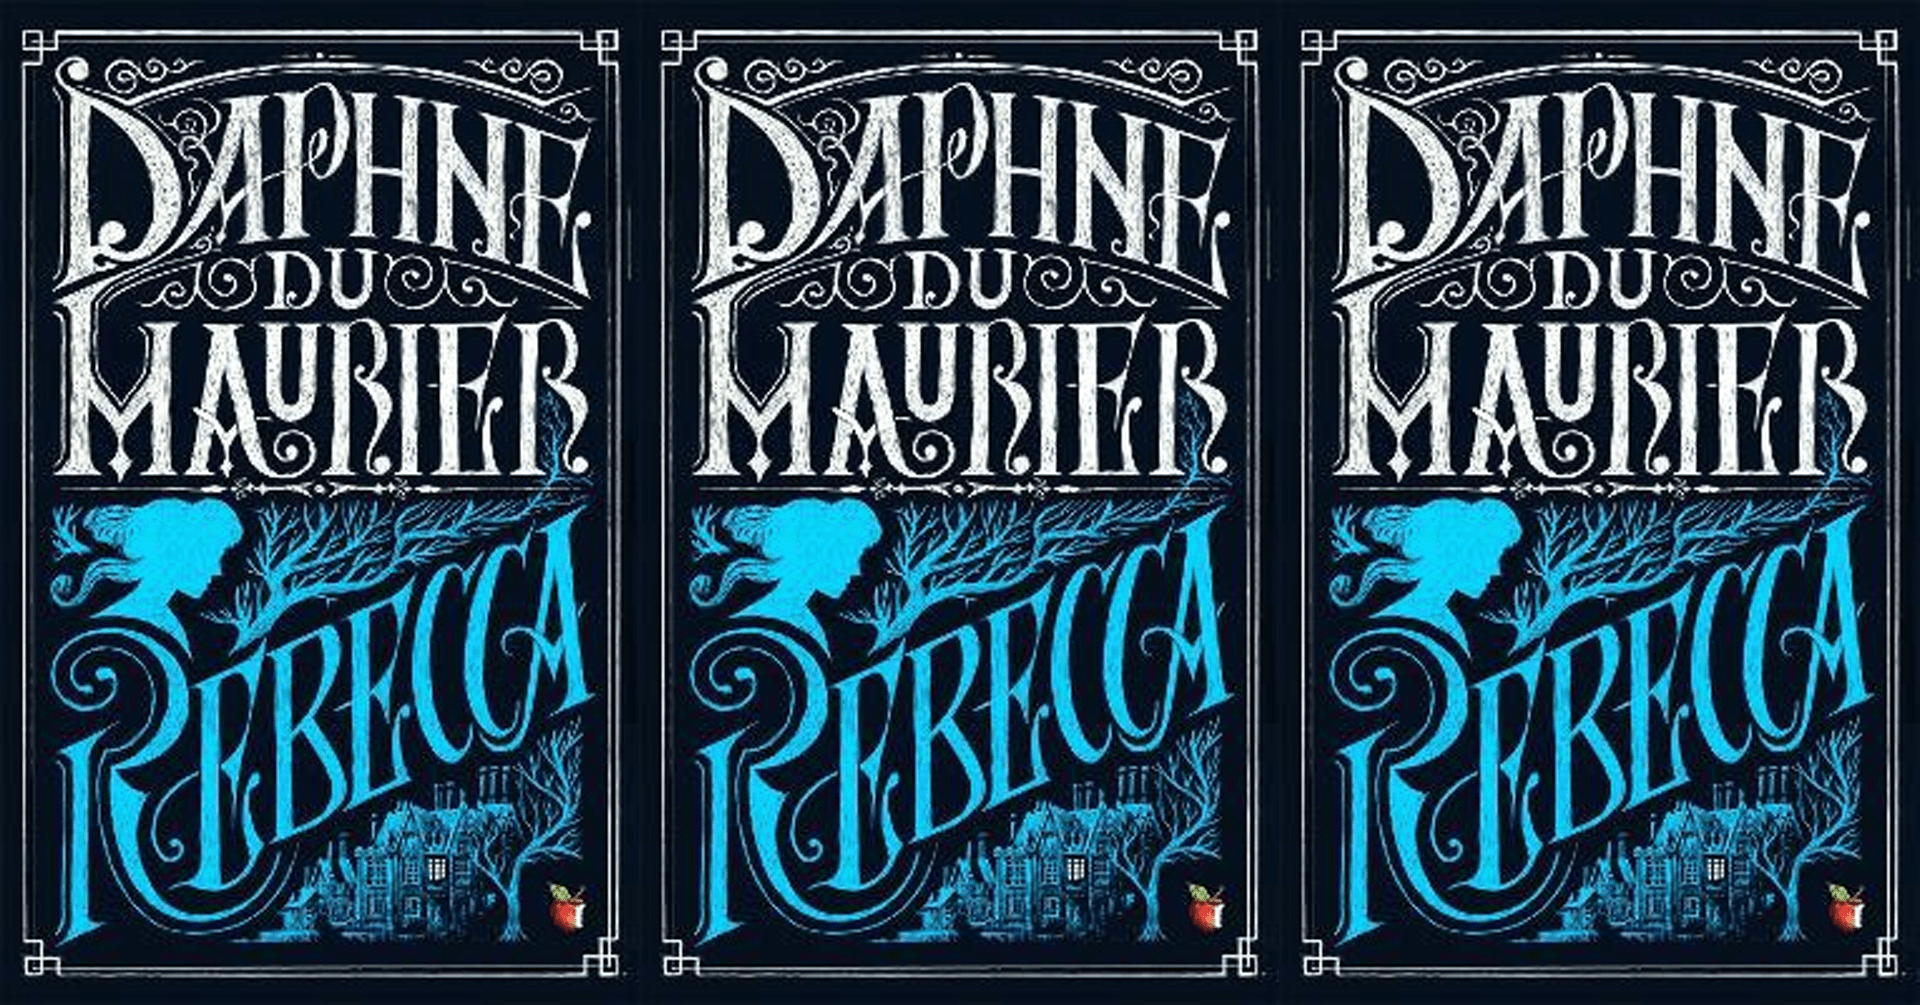 Rebecca by Daphne Du Maurier book cover